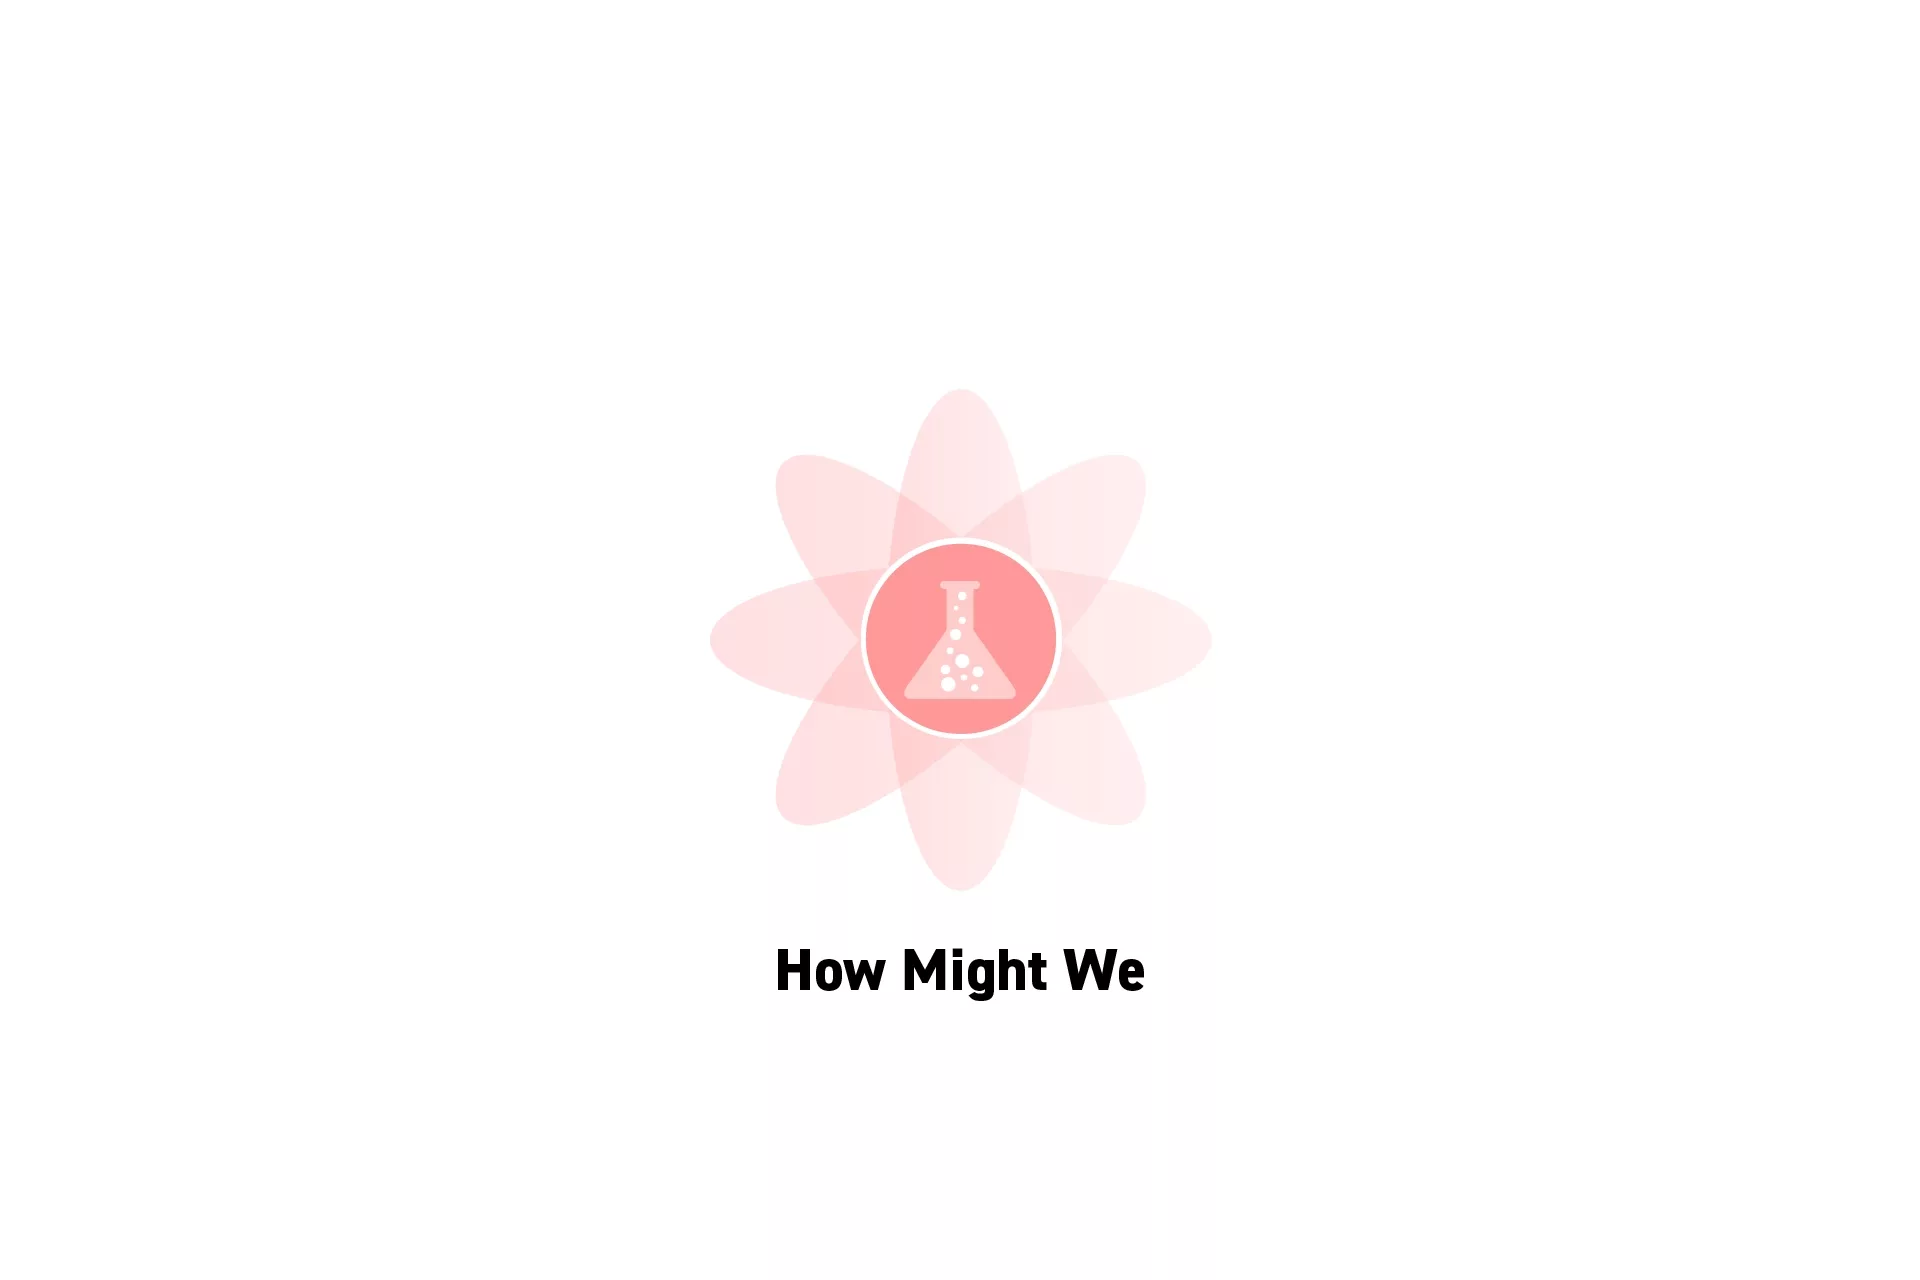 A flower that represents Strategy with the text “How Might We” beneath it.